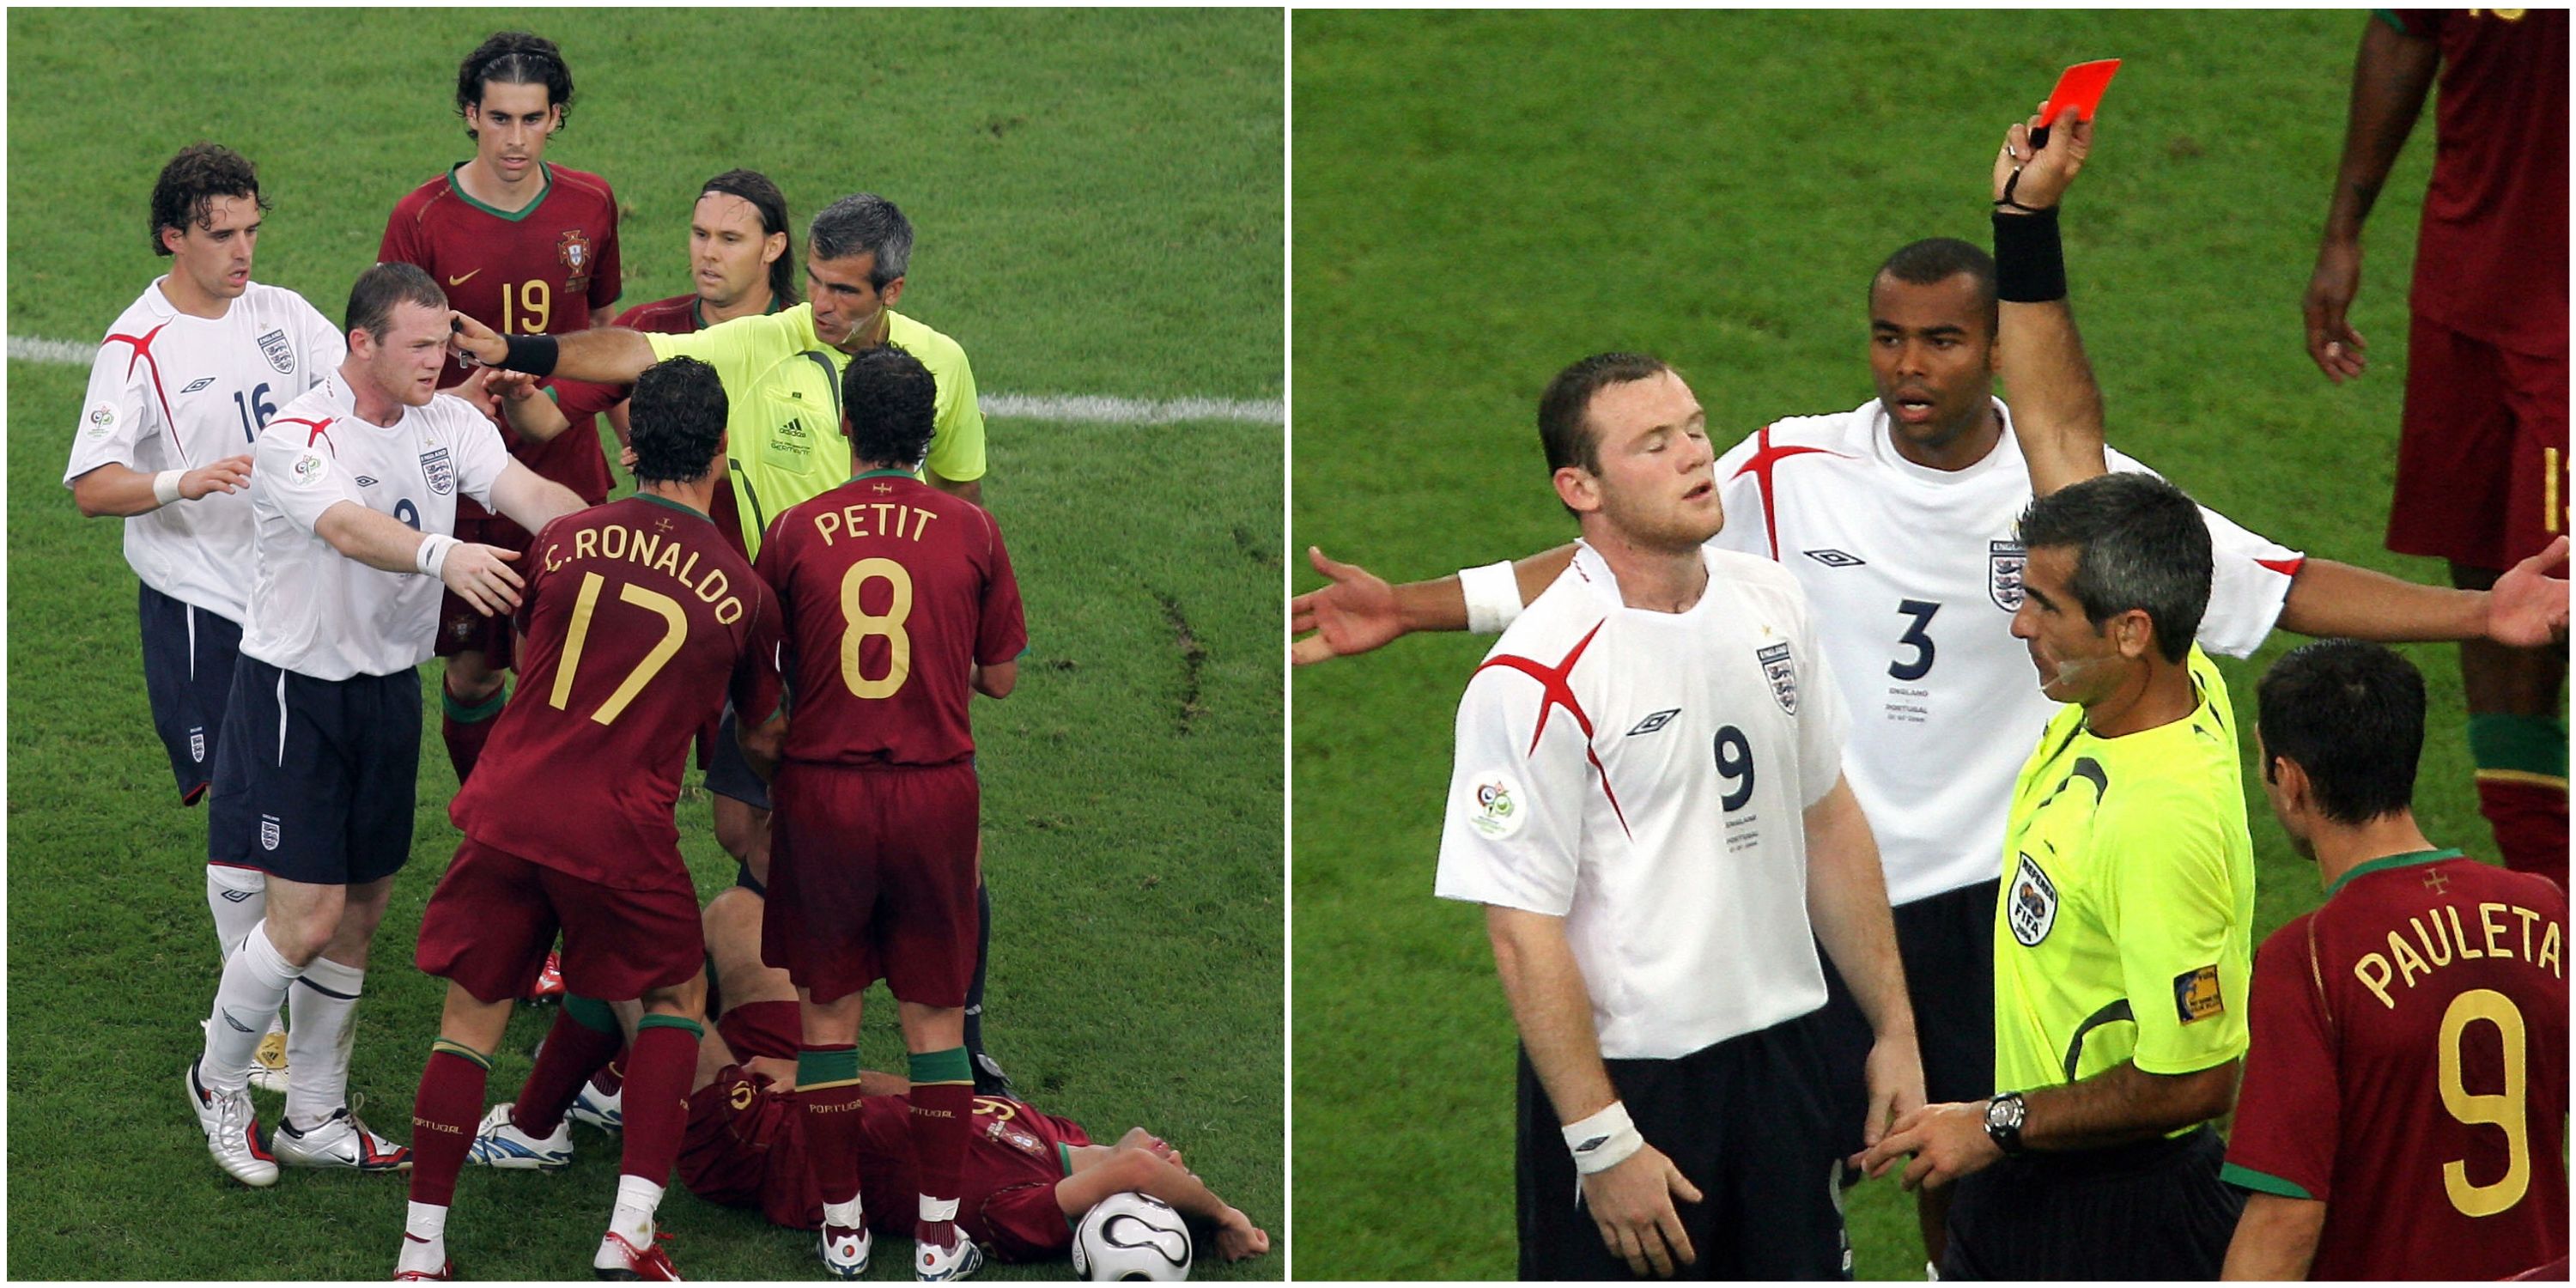 Wayne Rooney’s comments about Cristiano Ronaldo after 2006 World Cup red card